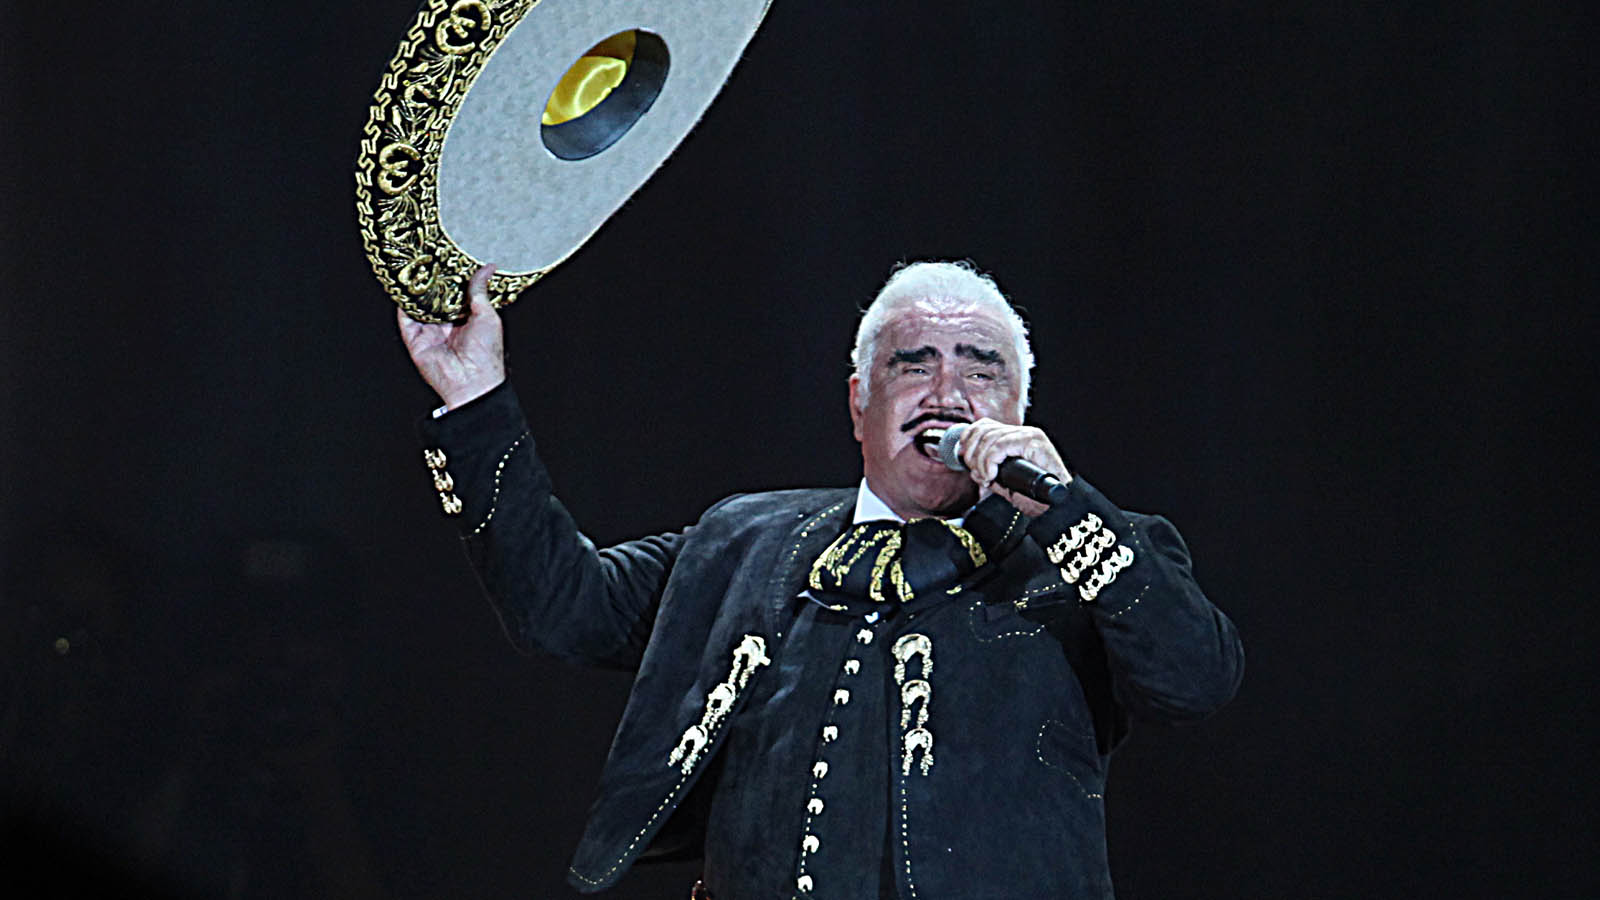 Mexican singer Vicente Fernandez performs at a free concert in Mexico City, Saturday, April 16, 2016.